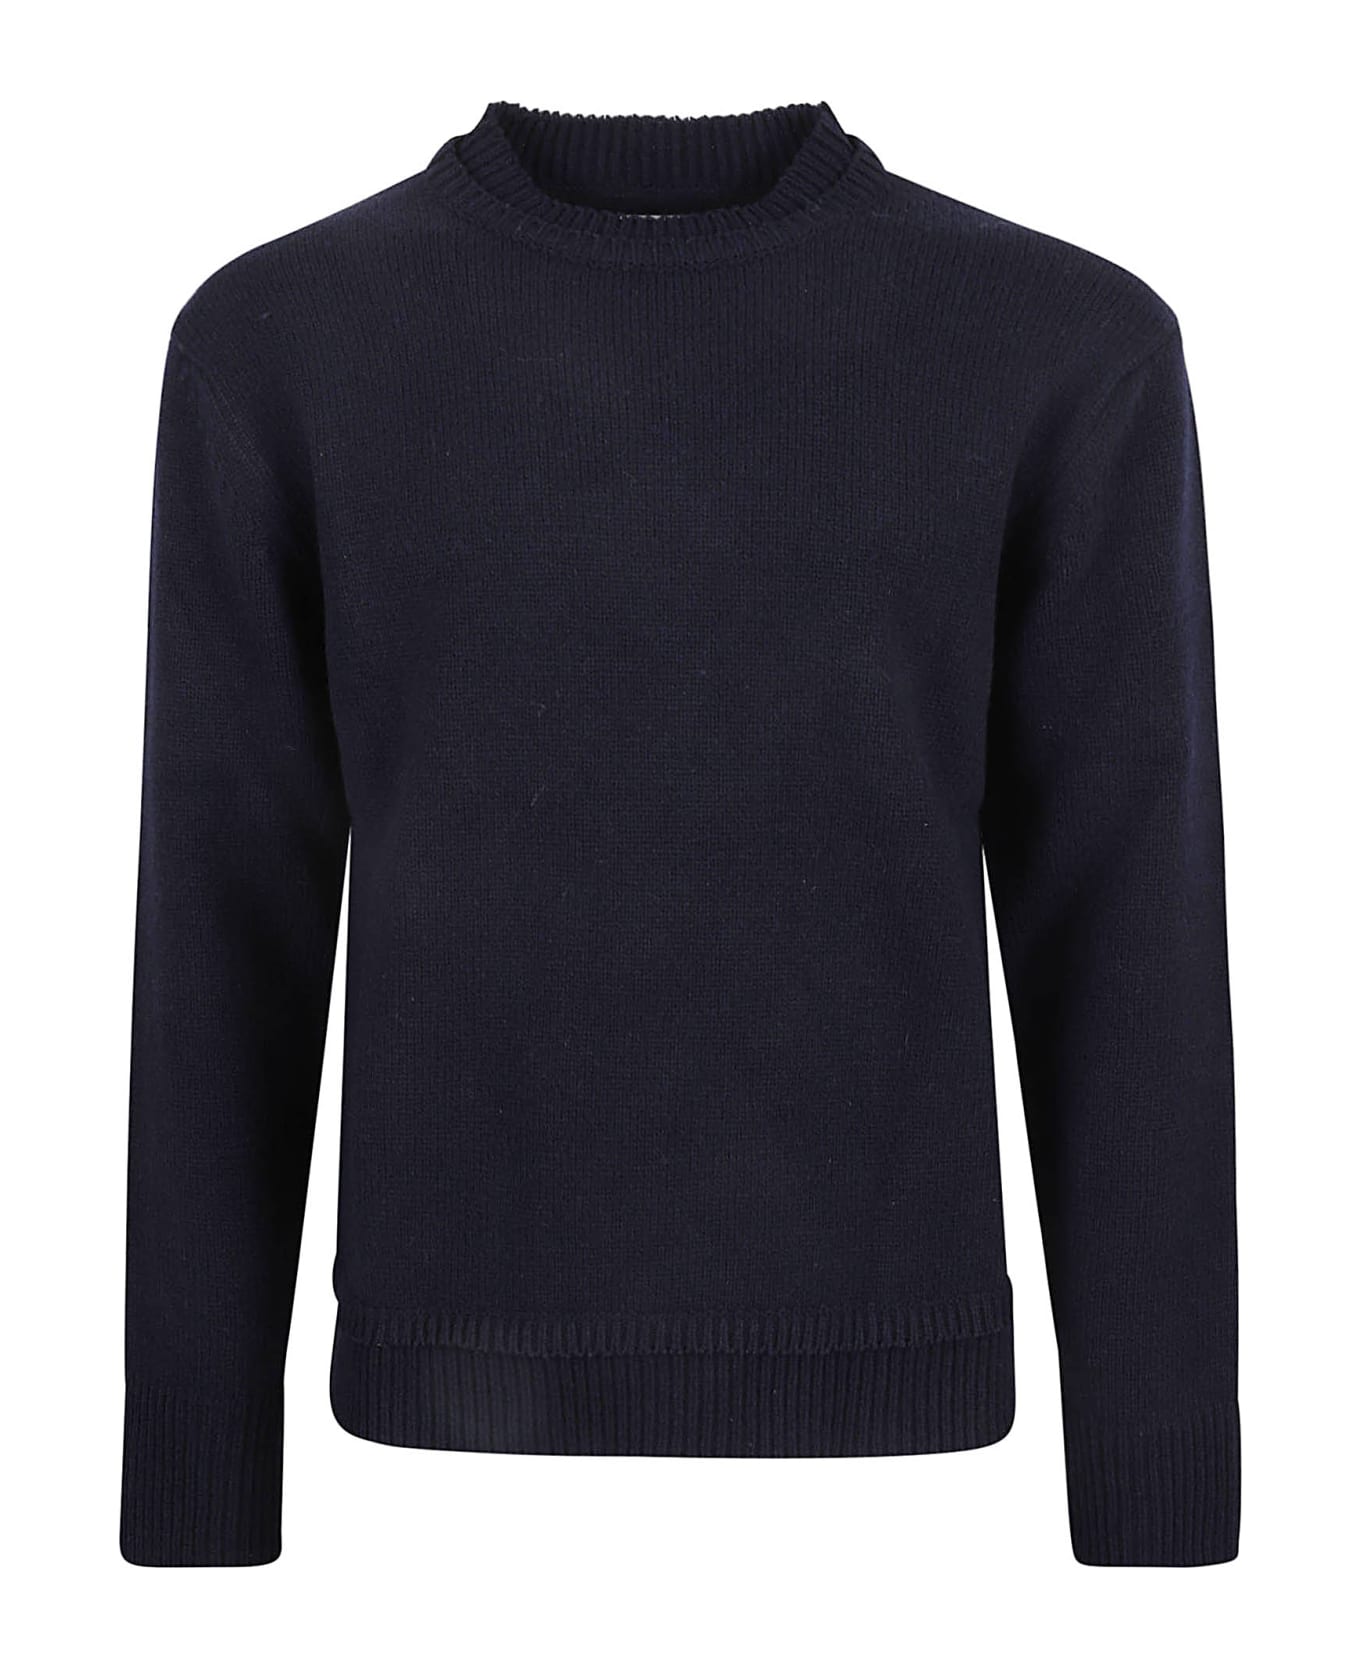 Maison Margiela Elbow Patches Sweater - Navy